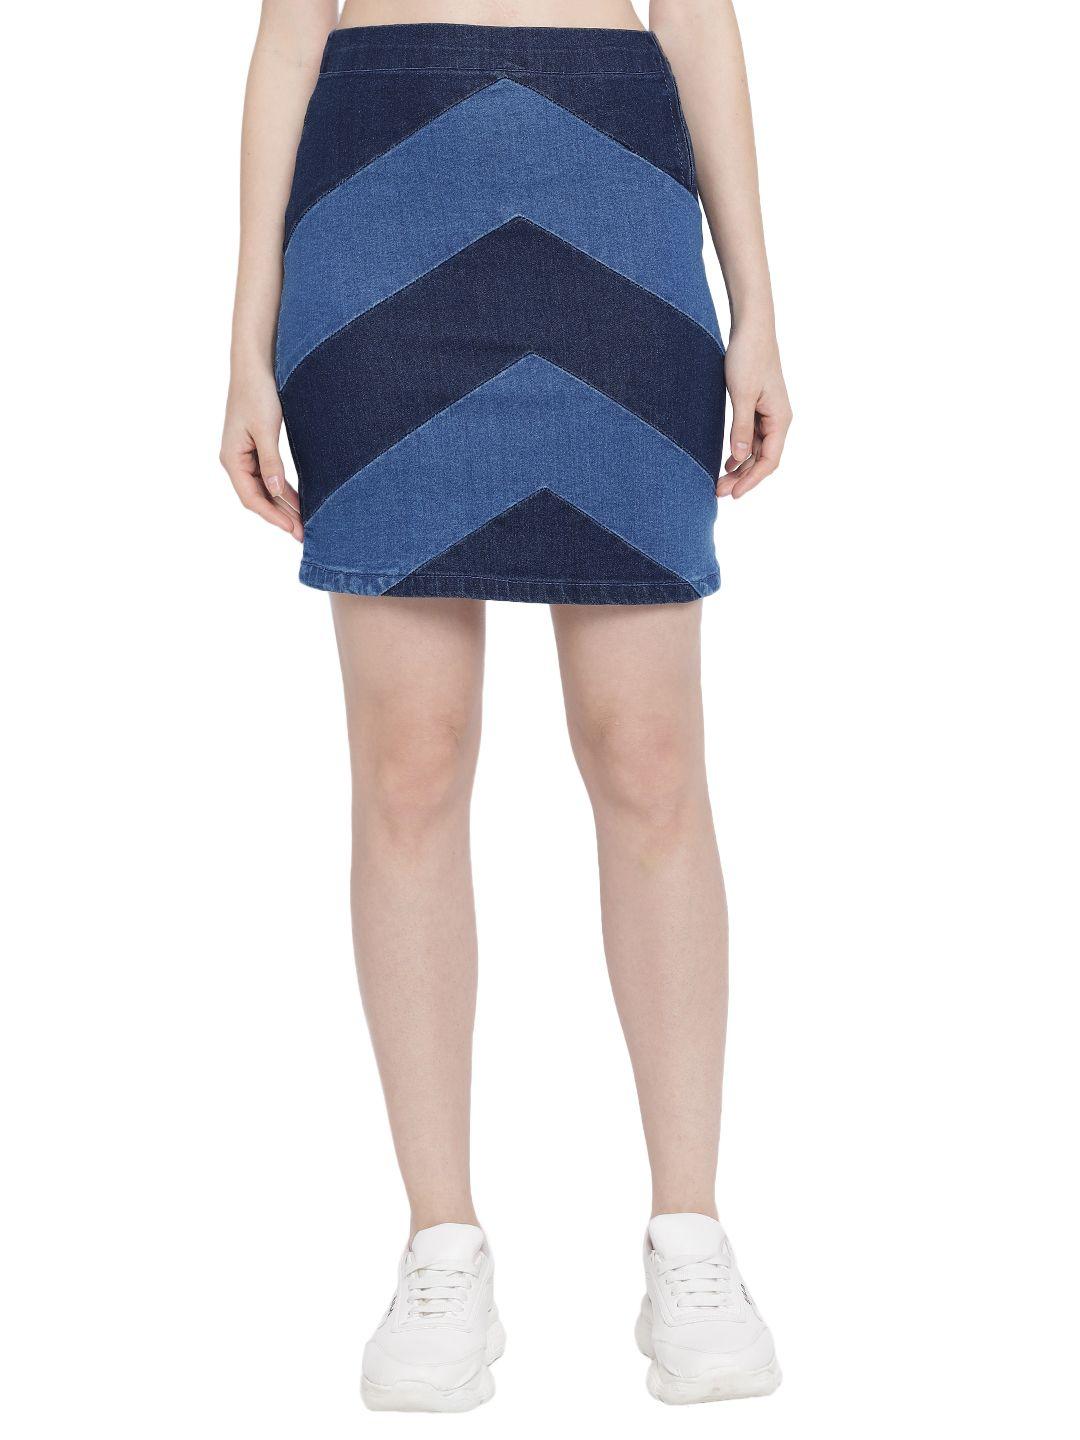 the-dry-state-women-blue-colorblocked-skirt